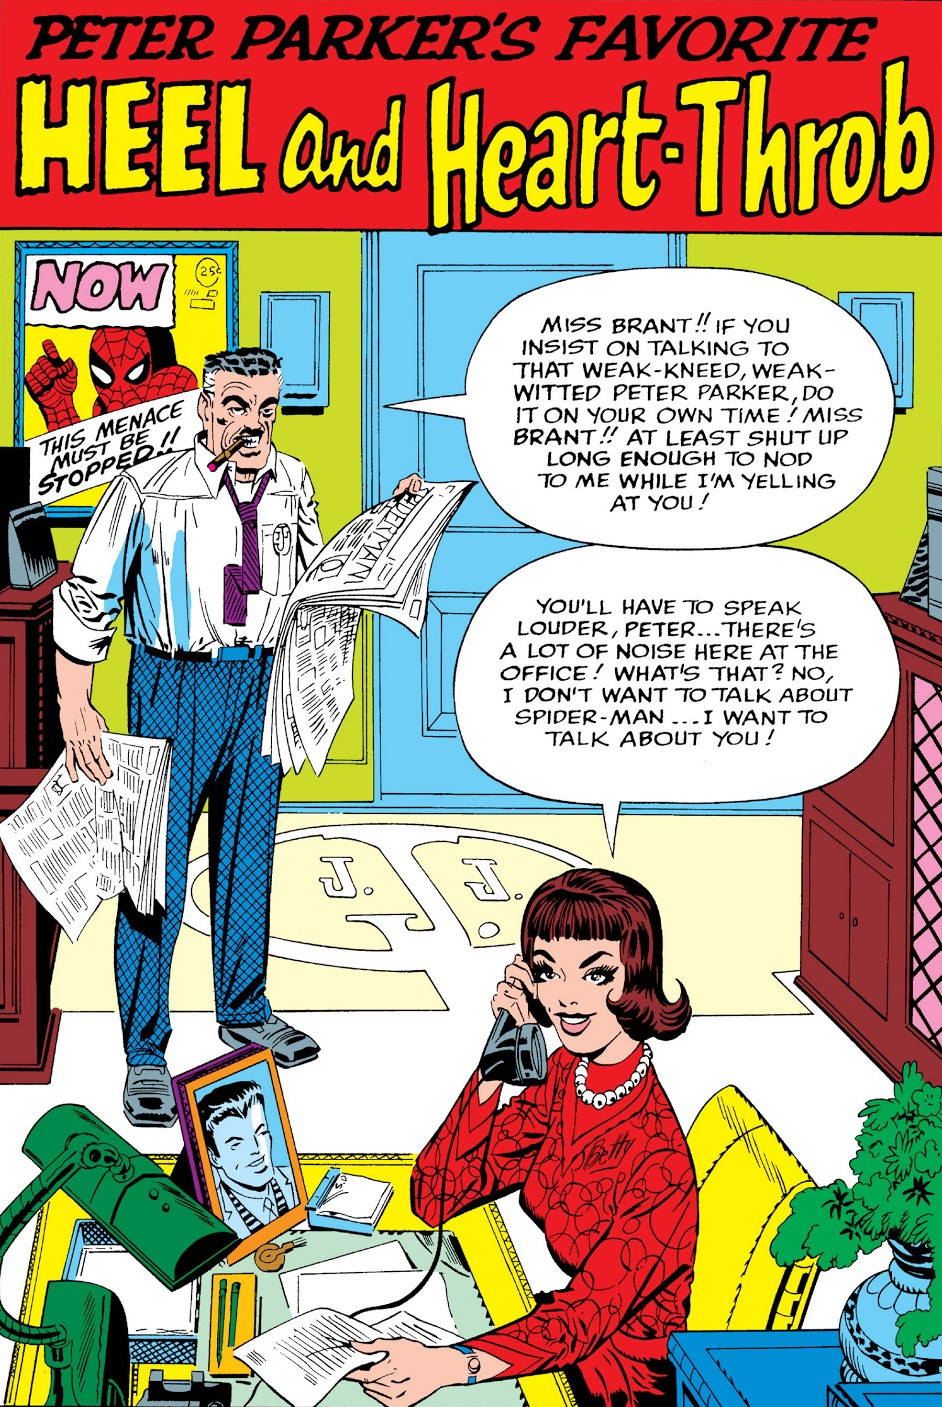 https://vignette.wikia.nocookie.net/marveldatabase/images/8/84/Heel_and_Heart_Throb_Pin-Up_from_Amazing_Spider-Man_Annual_Vol_1_1.jpg/revision/latest?cb=20150705213752